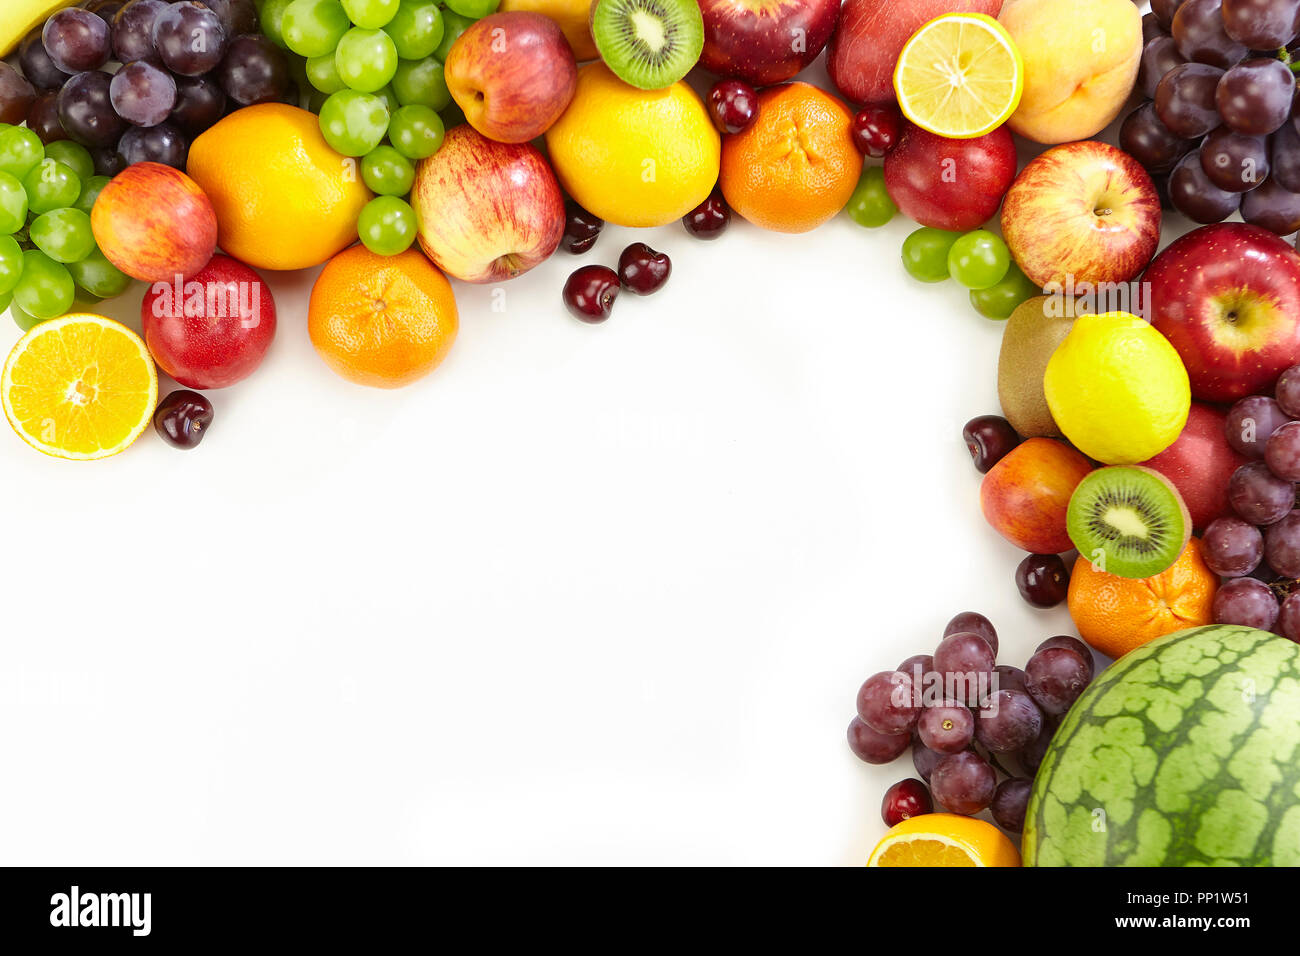 assorted fresh fruits isolated on white background, with copy space. Stock Photo